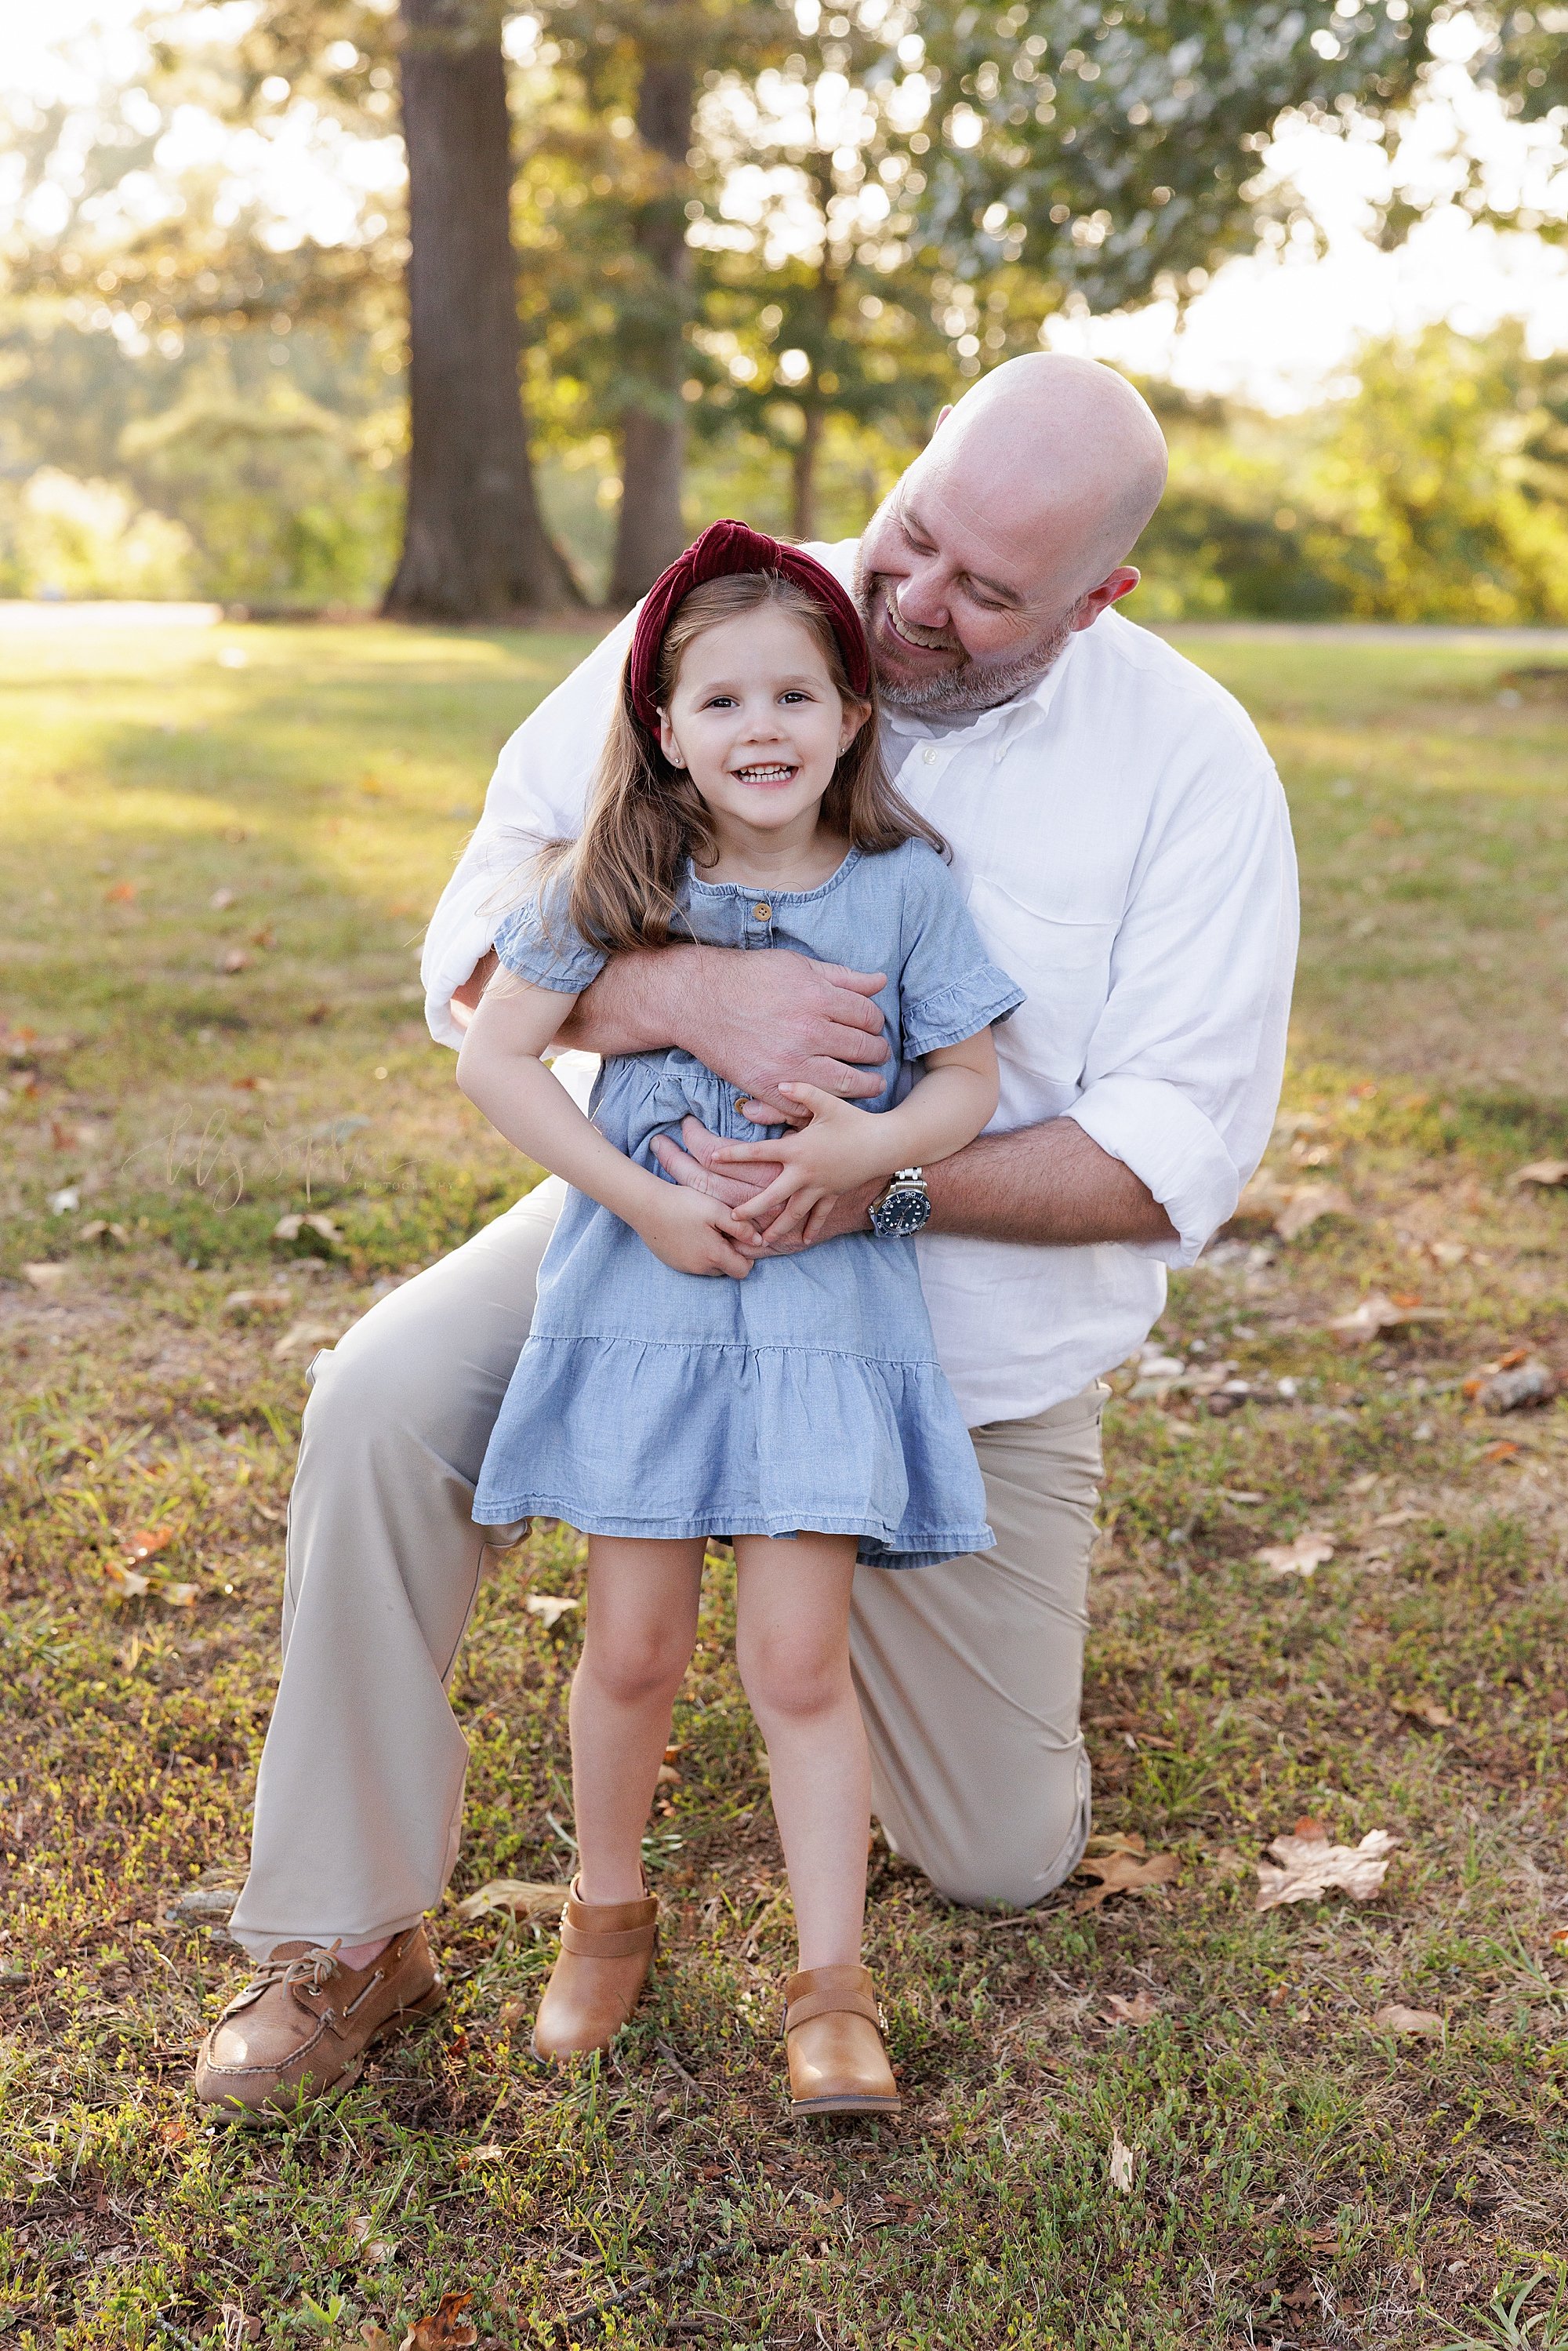 intown-atlanta-decatur-brookhaven-buckhead-outdoor-fall-pictures-family-photoshoot_5532.jpg